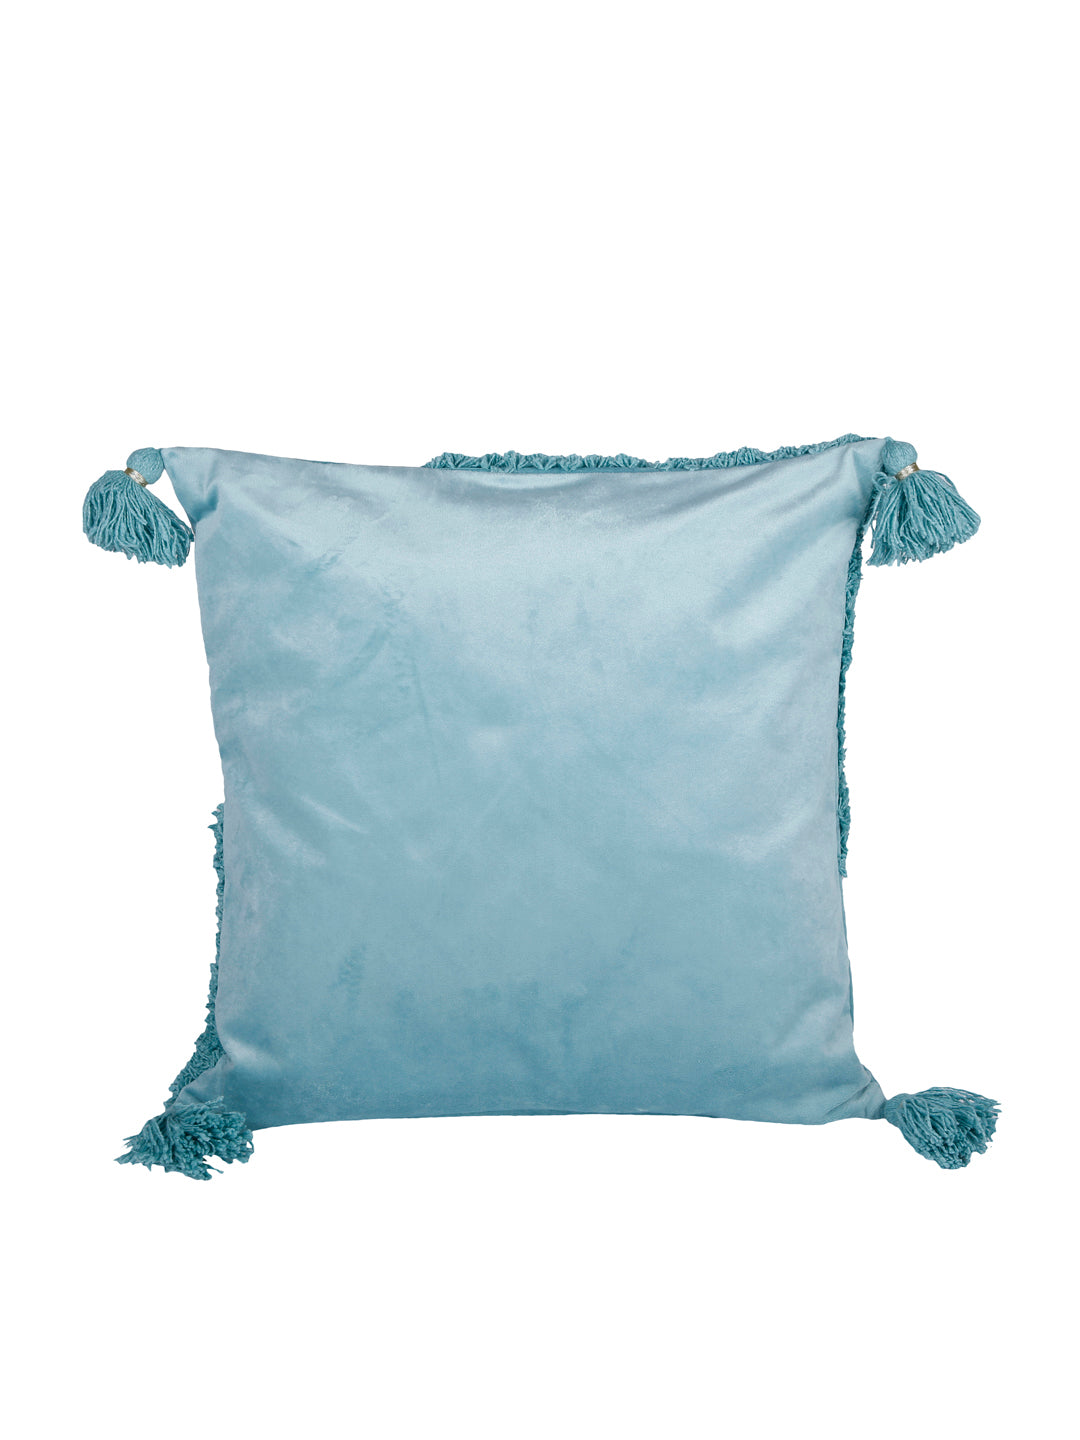 Turquoise Blue Set of 2 Embroidered Velvet Square Cushion Covers